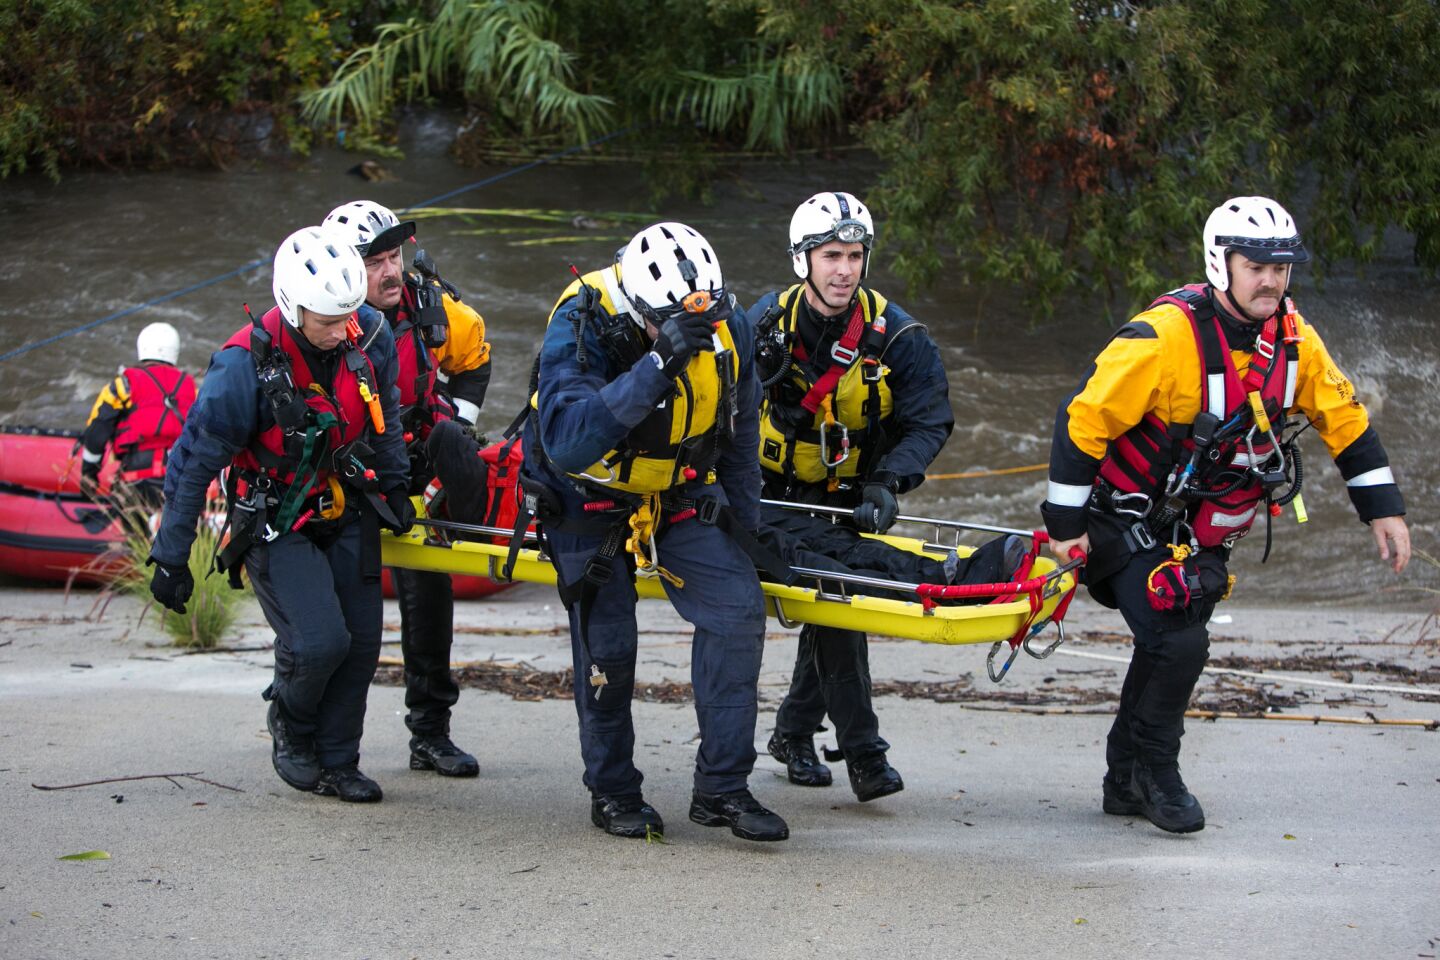 L.A. Fire Department swift water rescue members saved a woman from an island in the middle of the storm-swollen Los Angeles River.